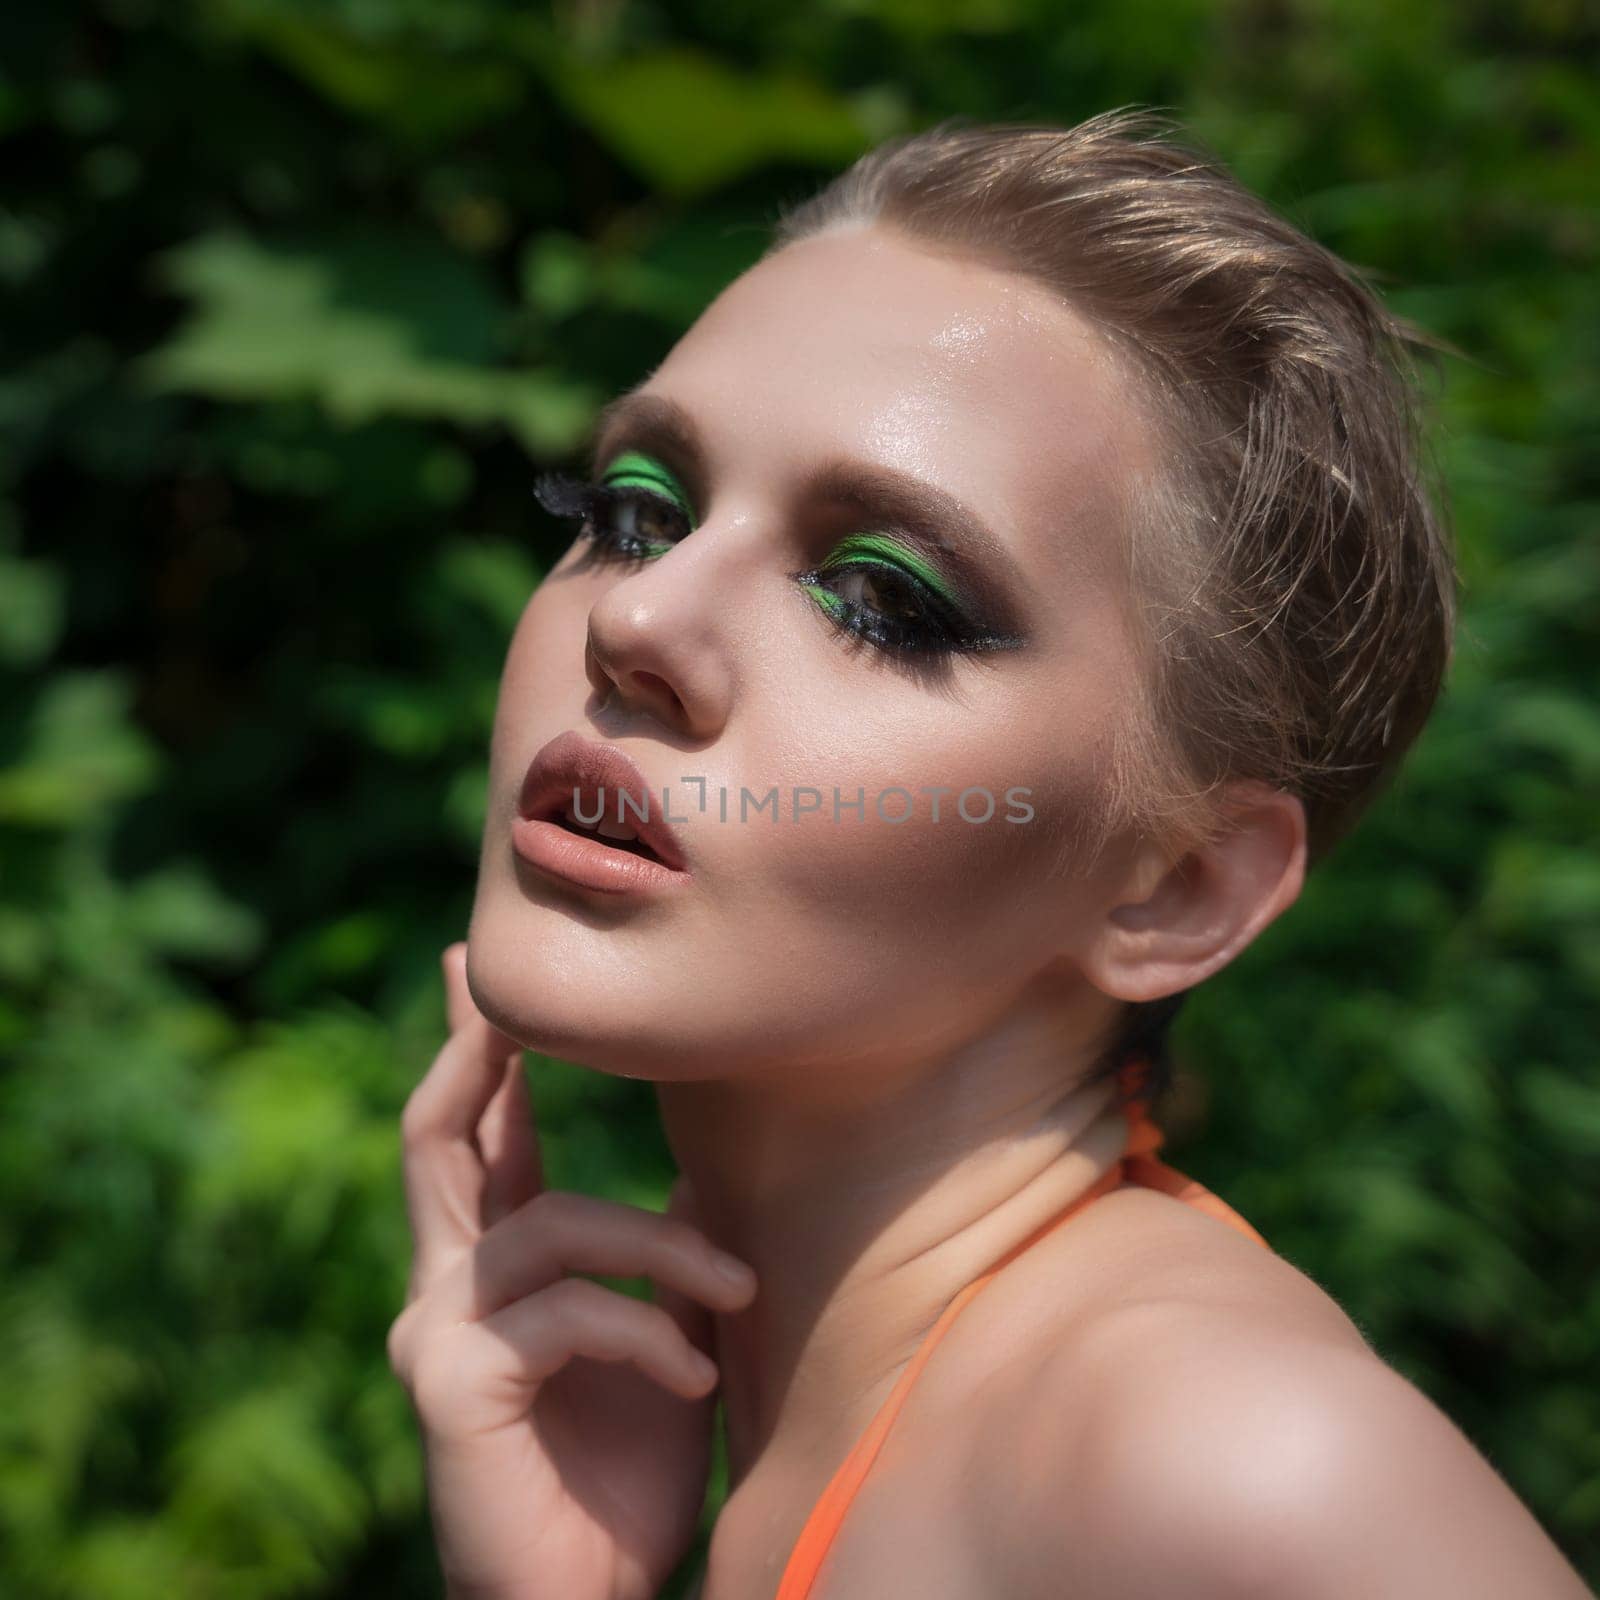 Close-up portrait of blonde woman with short hair, bright make-up against background of green leaves in summer forest. Beauty adult female with sensually parted mouth stares